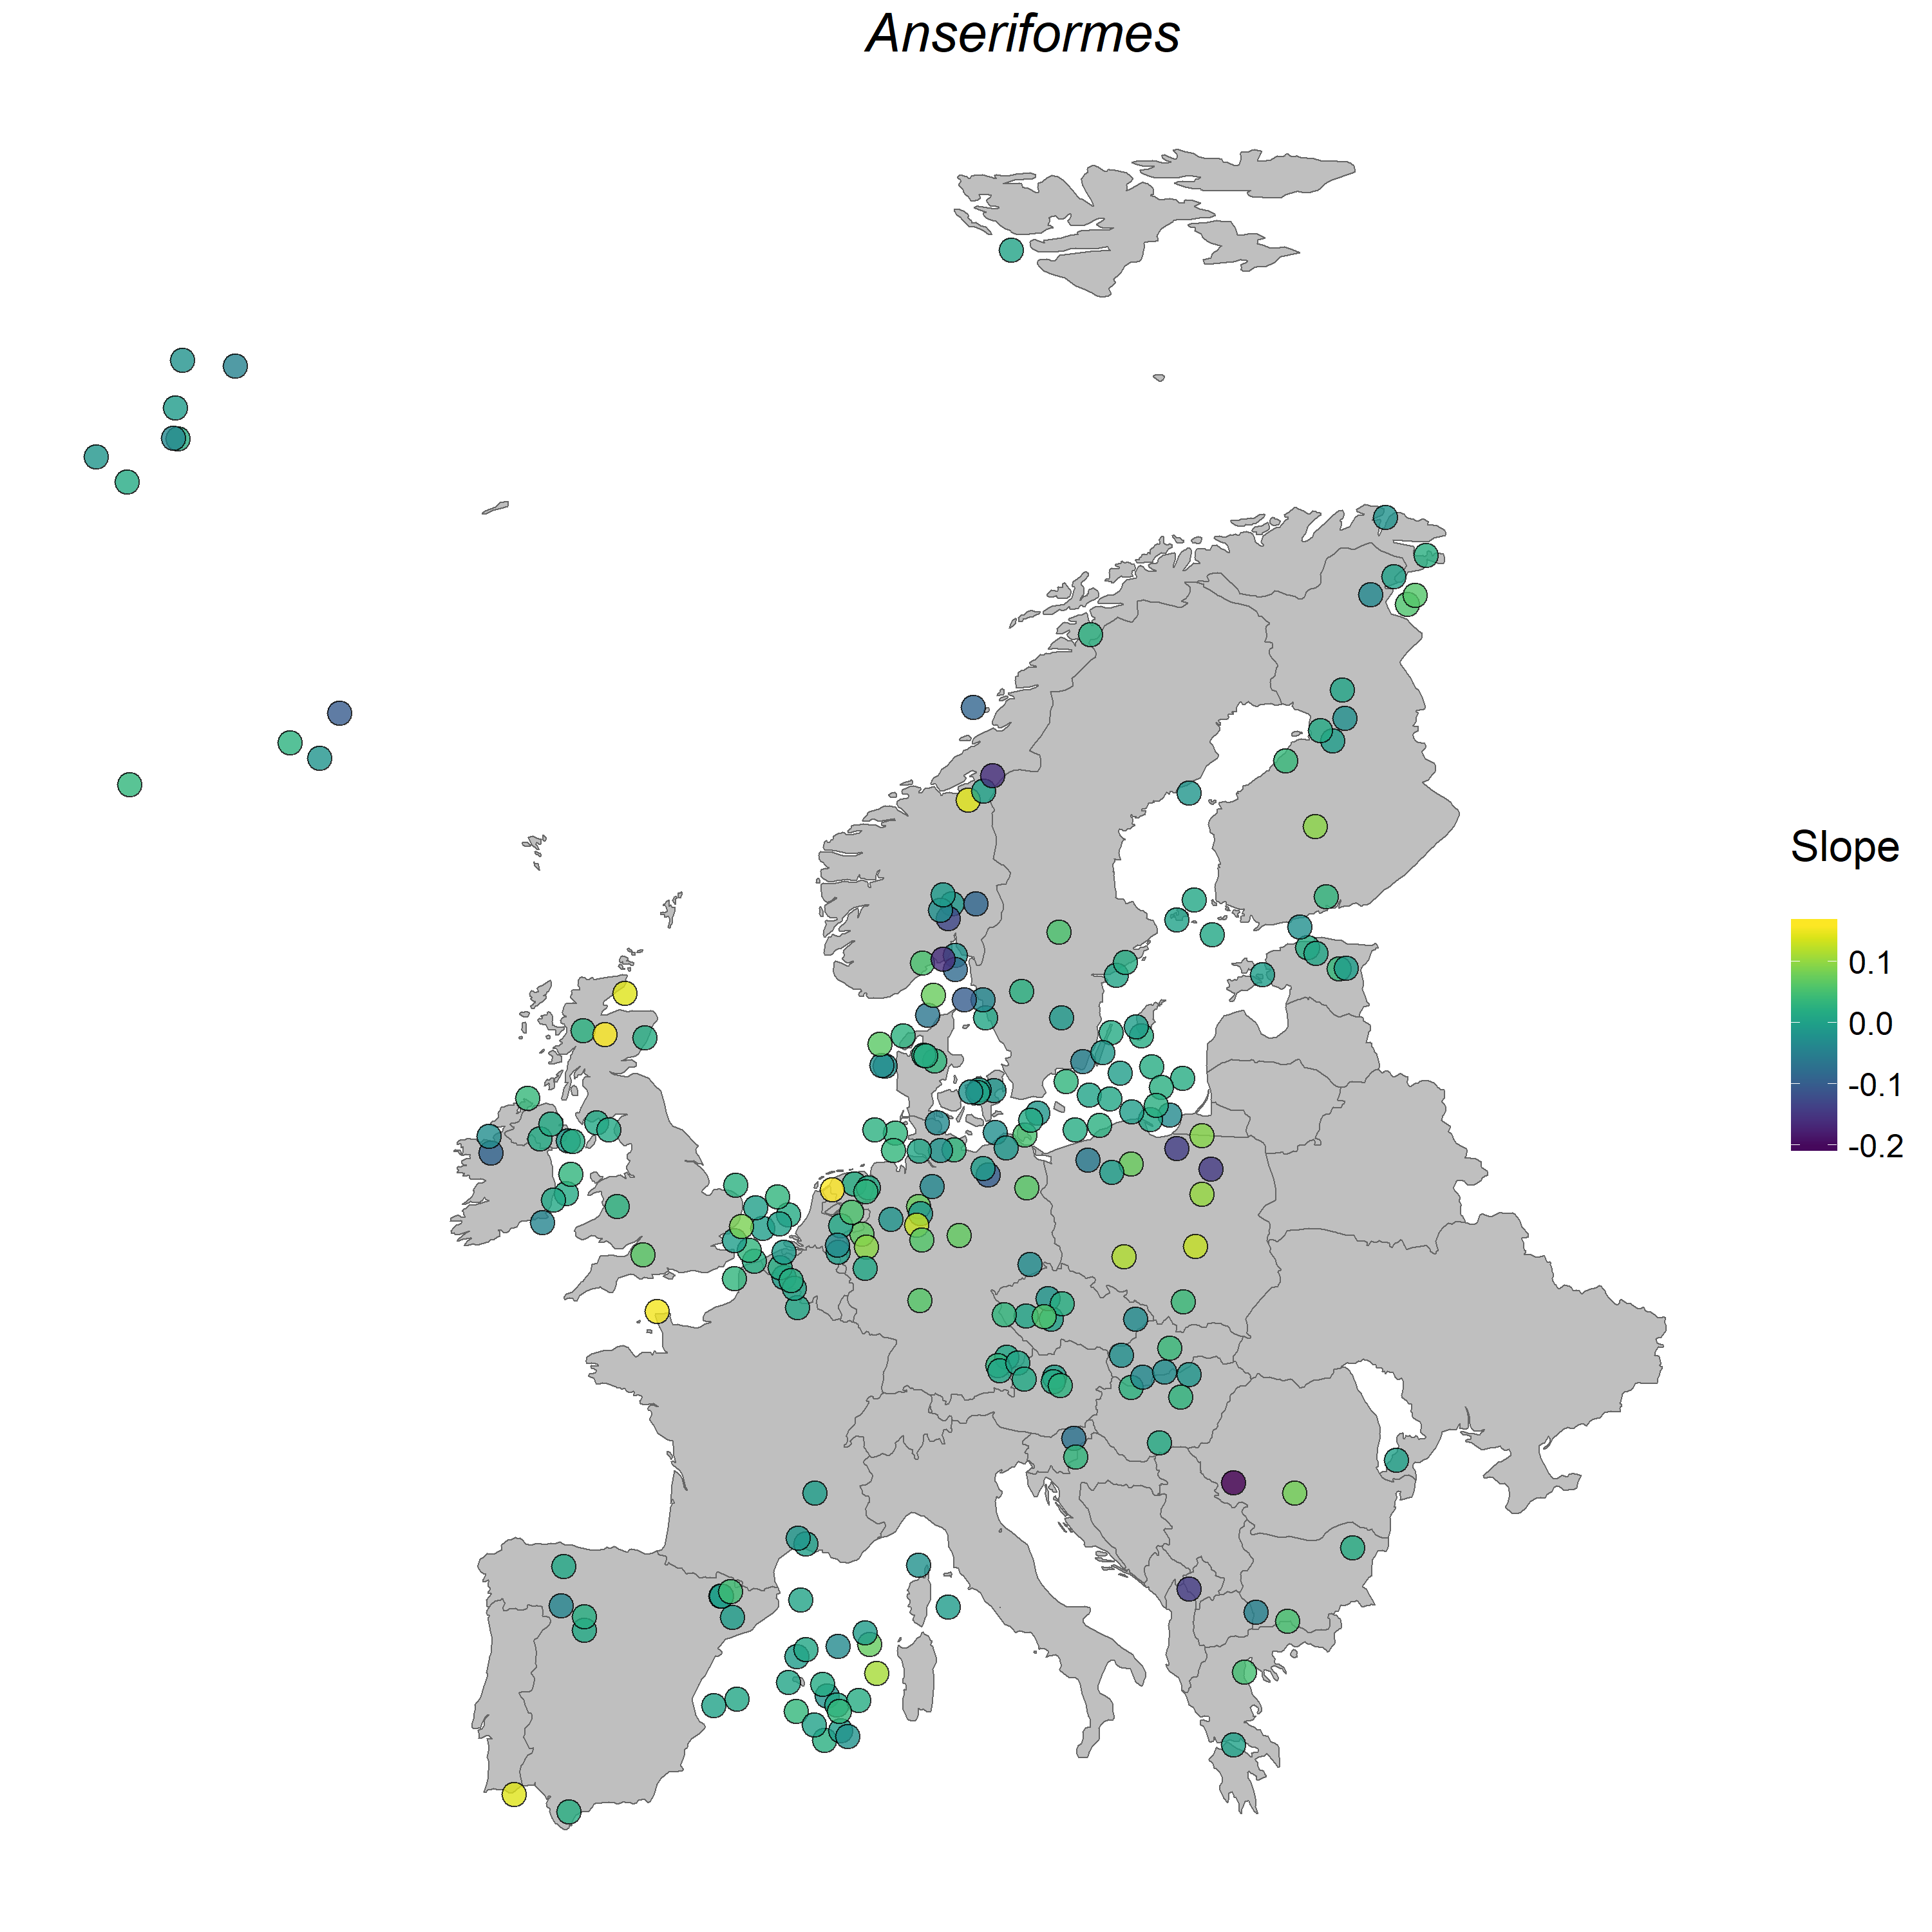 Anseriformes populations in Europe.